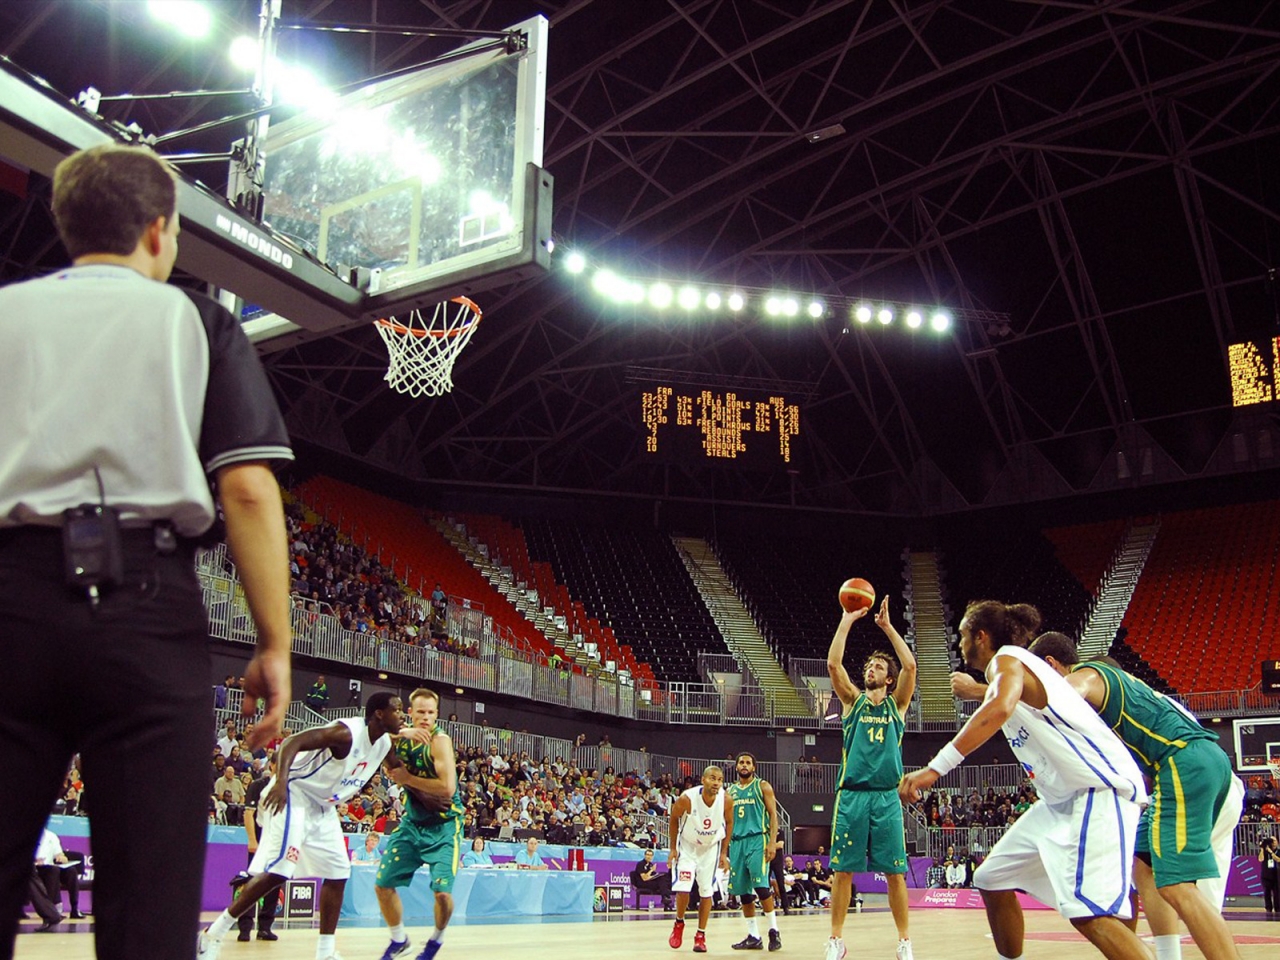 Basketball on the Olympic Park for 1280 x 960 resolution